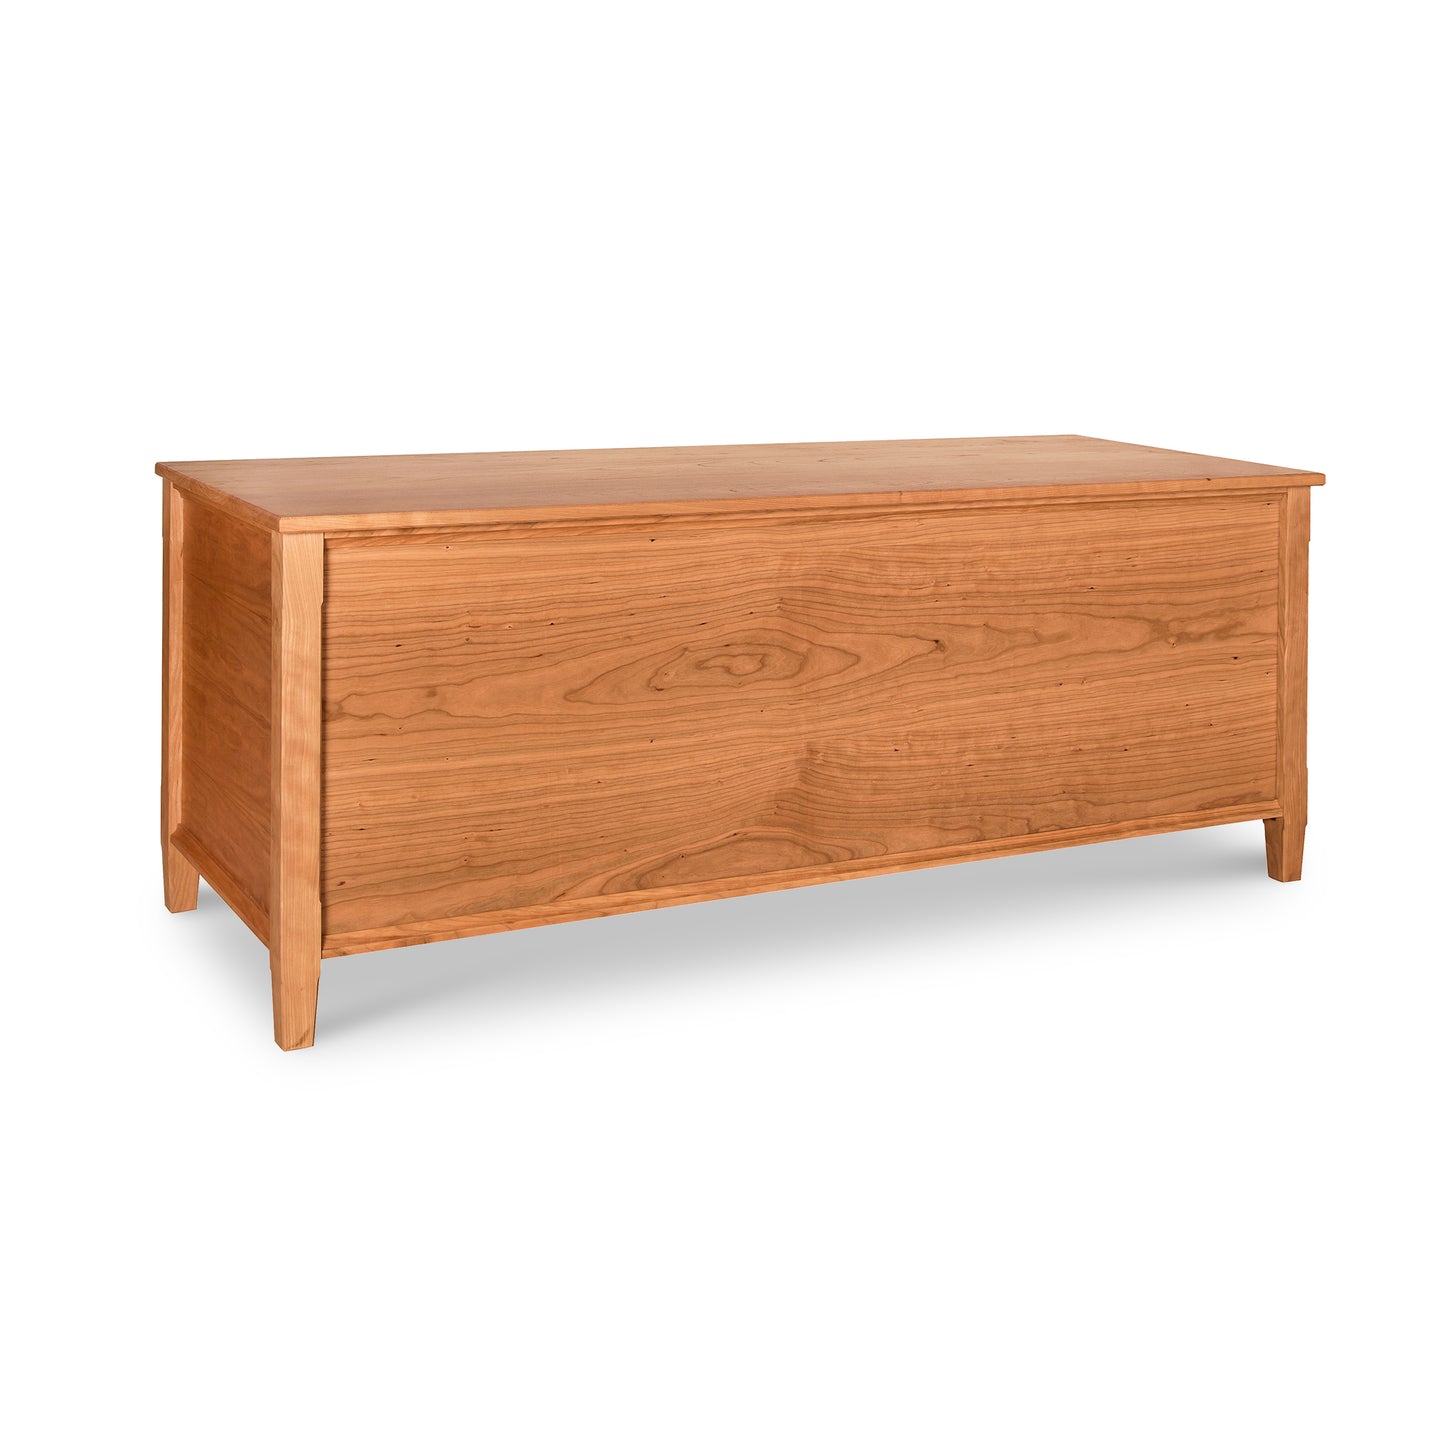 This eco-friendly Vermont Shaker Blanket Chest, made by Maple Corner Woodworks, is showcased on a clean white background.